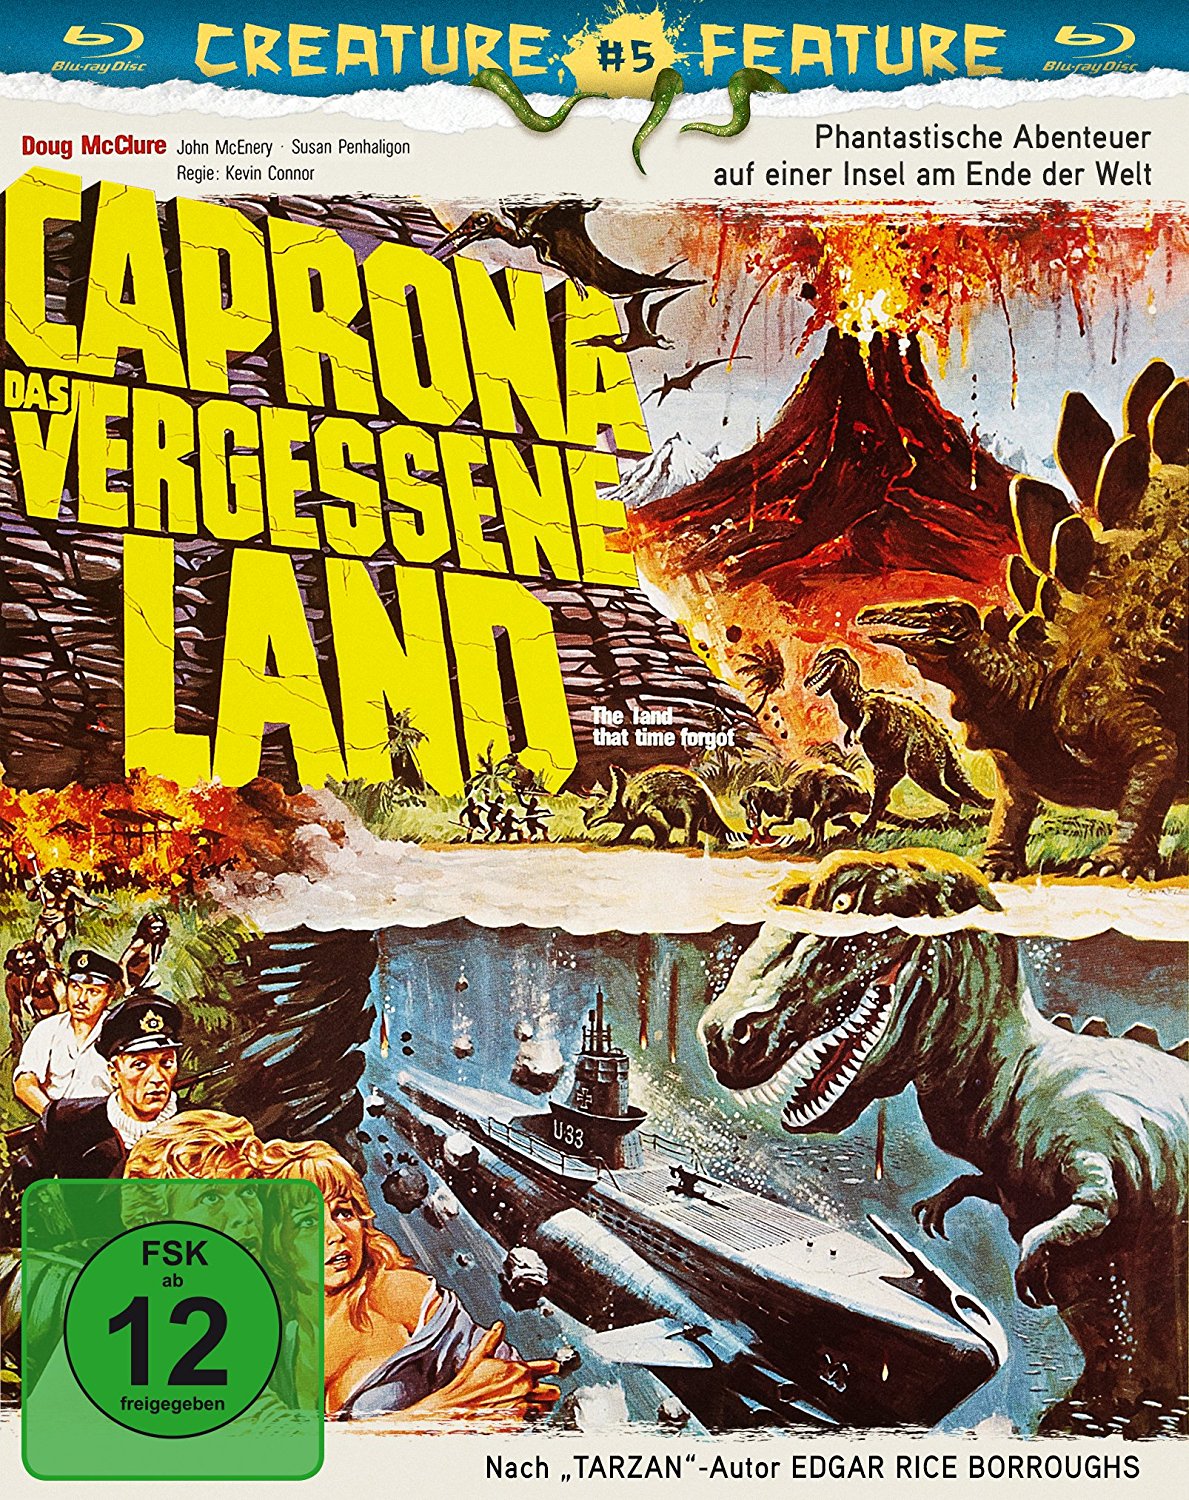 Земля забытая временем. The Land that time forgot 1975 poster. The Adventure you will never forget! Edgar Rice Burroughts the Land that time forgot 1975.